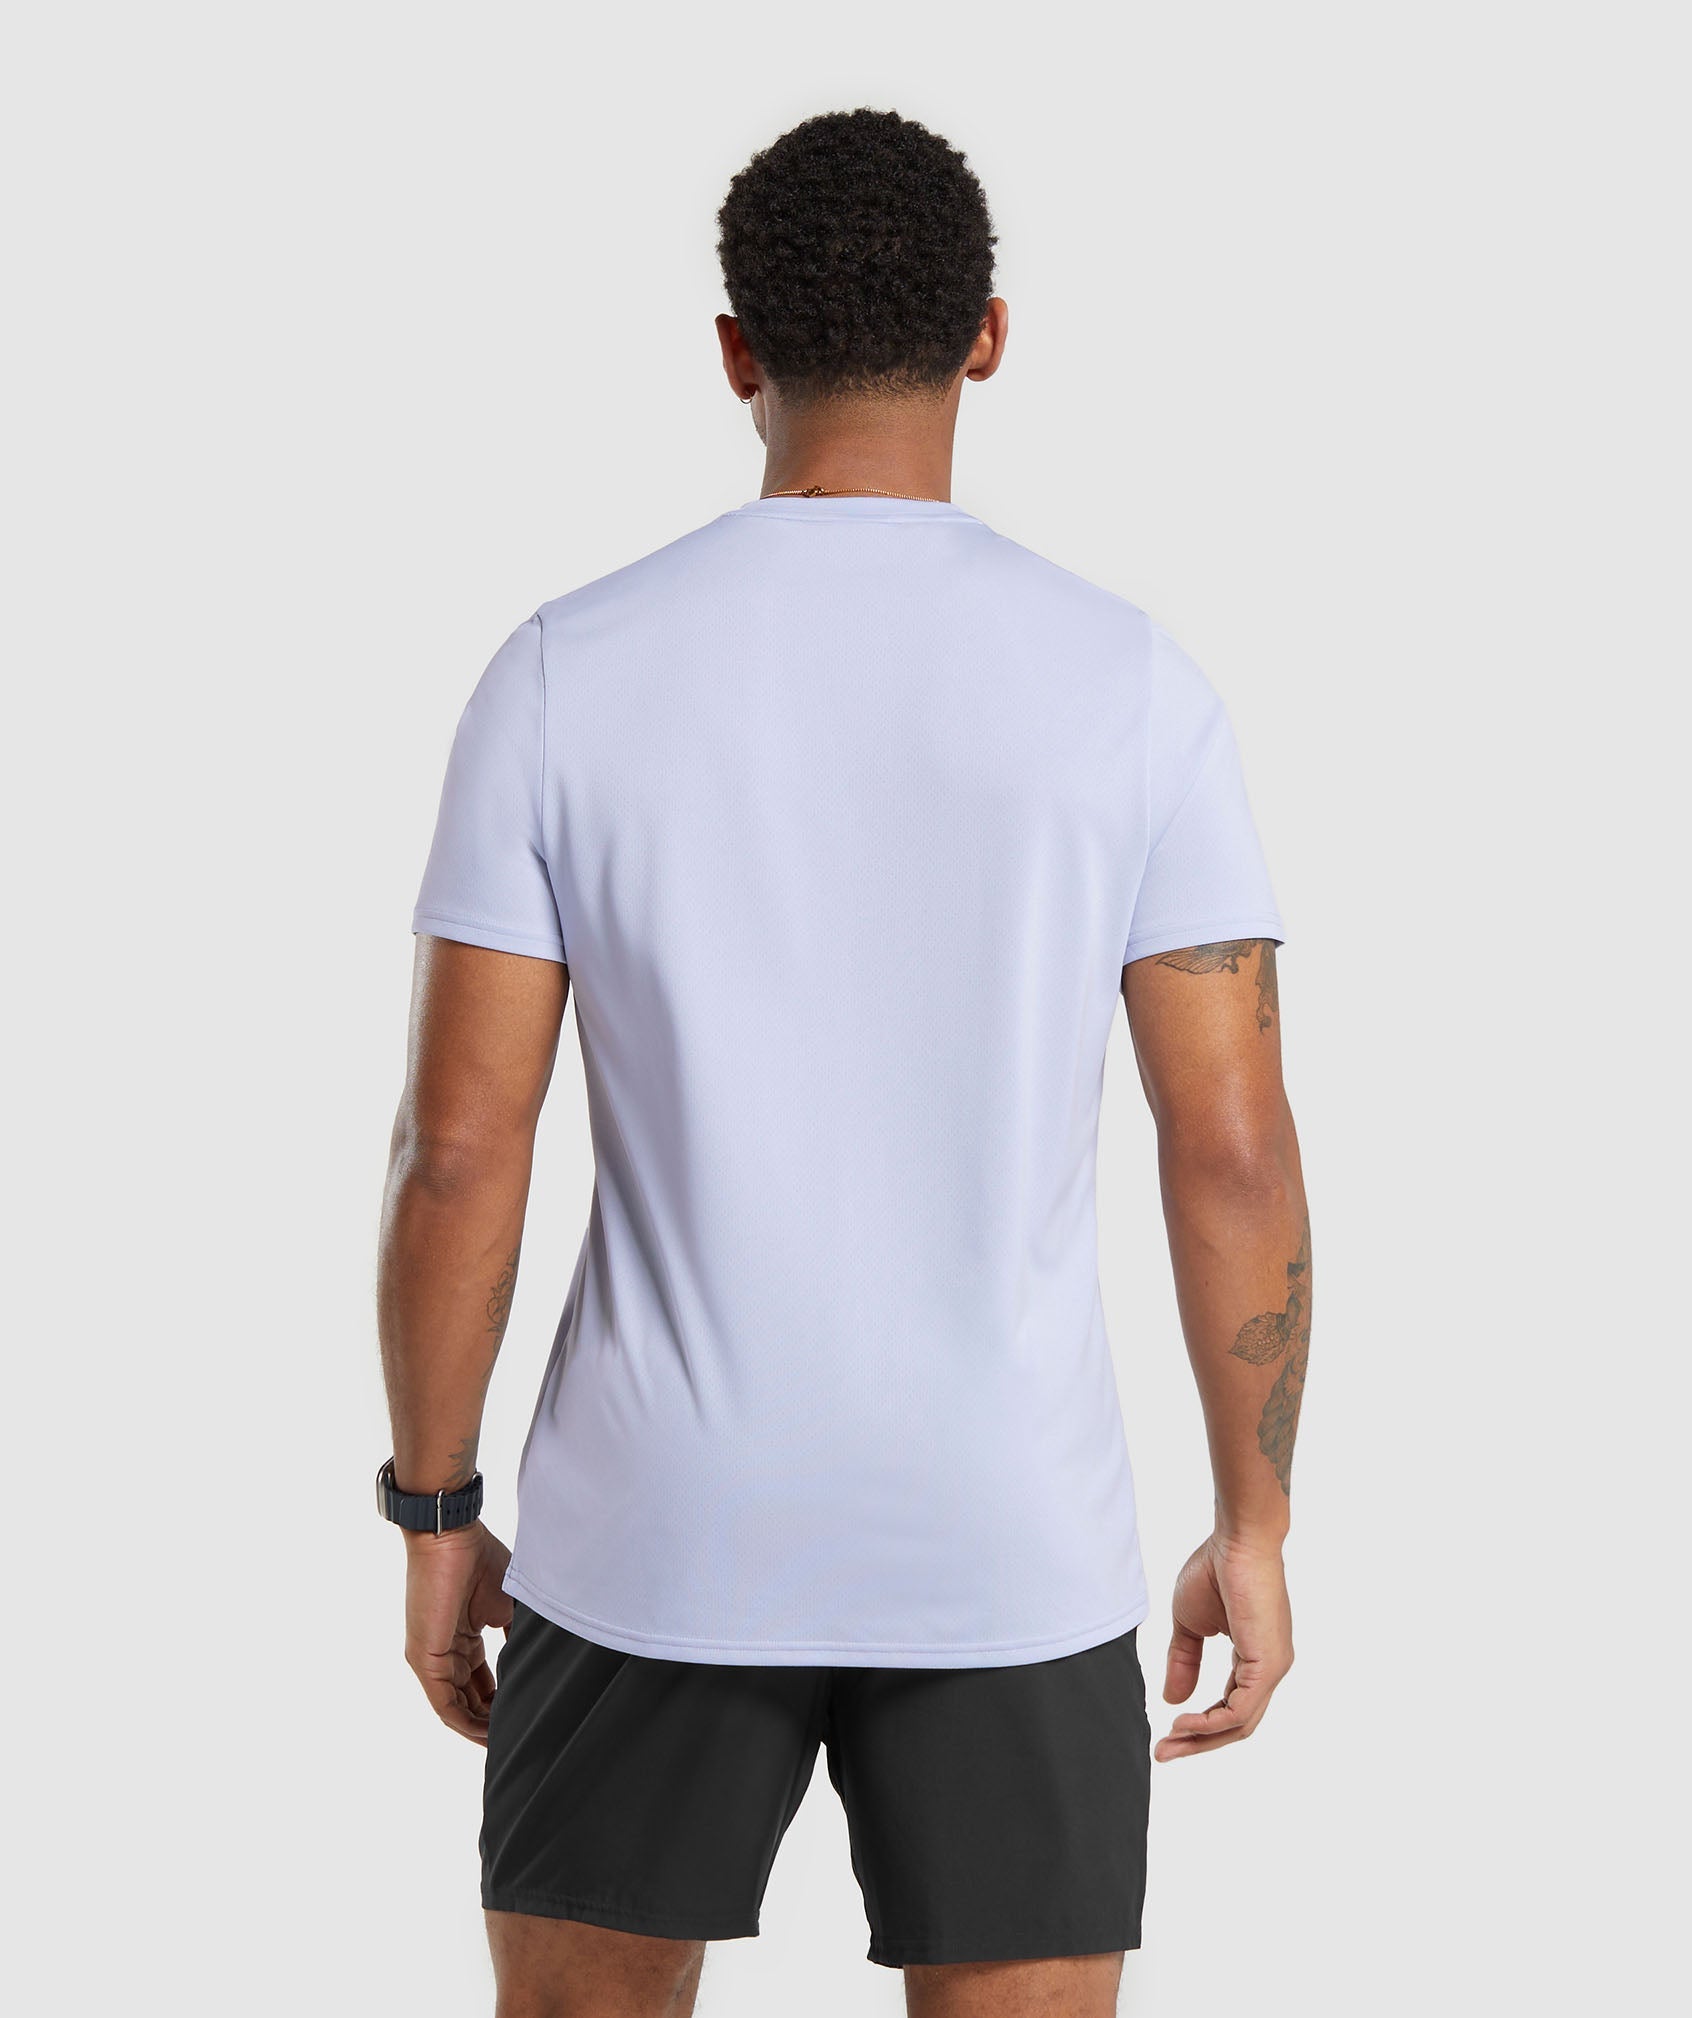 Arrival T-Shirt in Silver Lilac - view 2